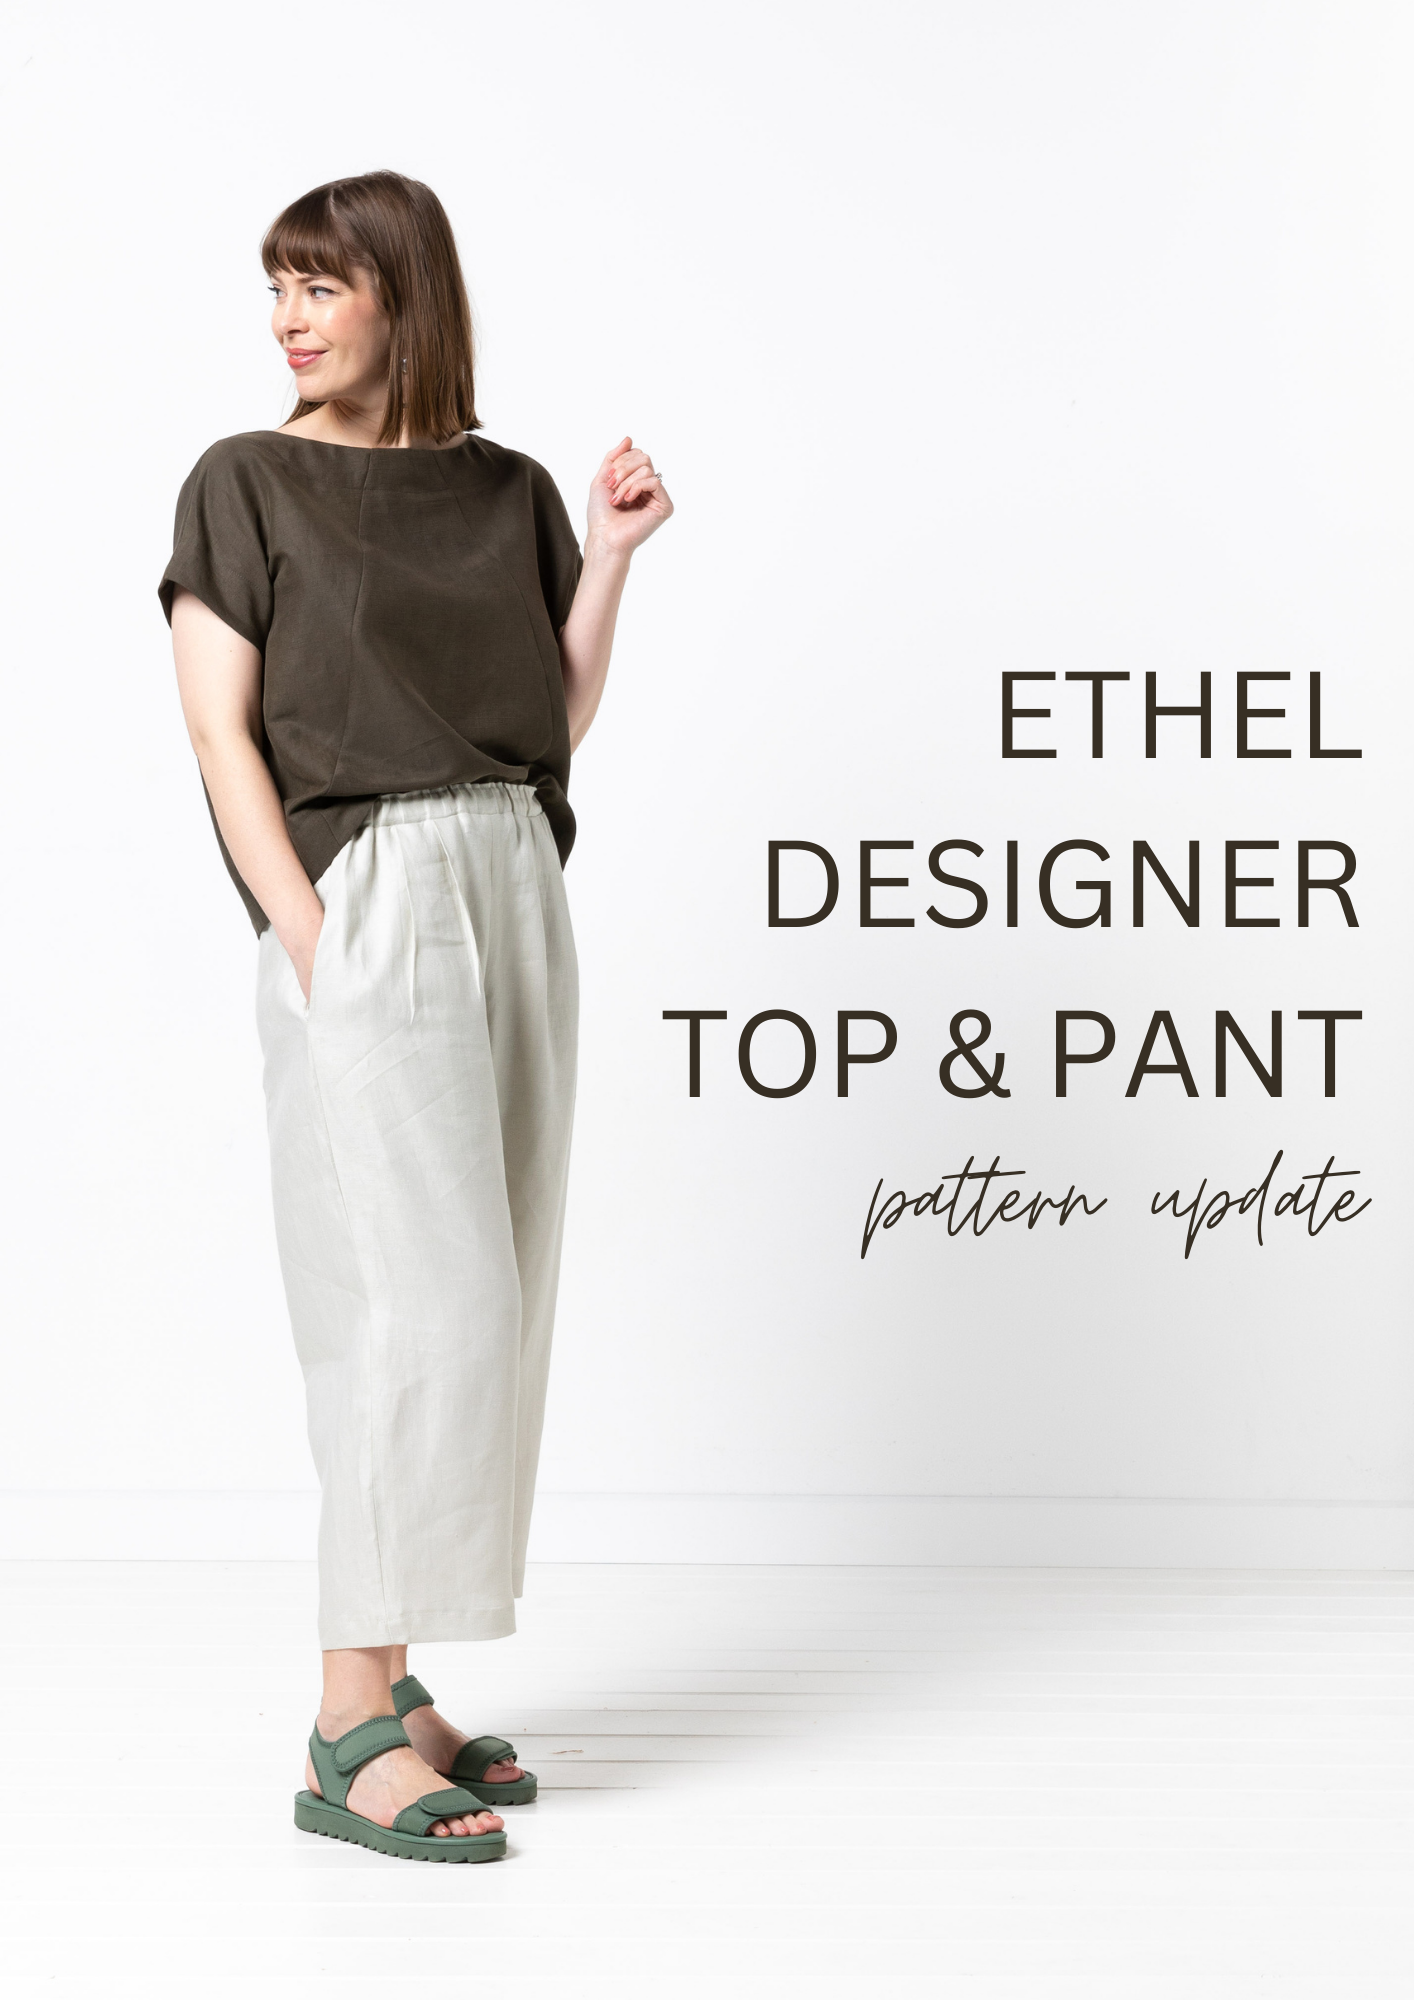 Ethel Top & Pant patterns have had an update!